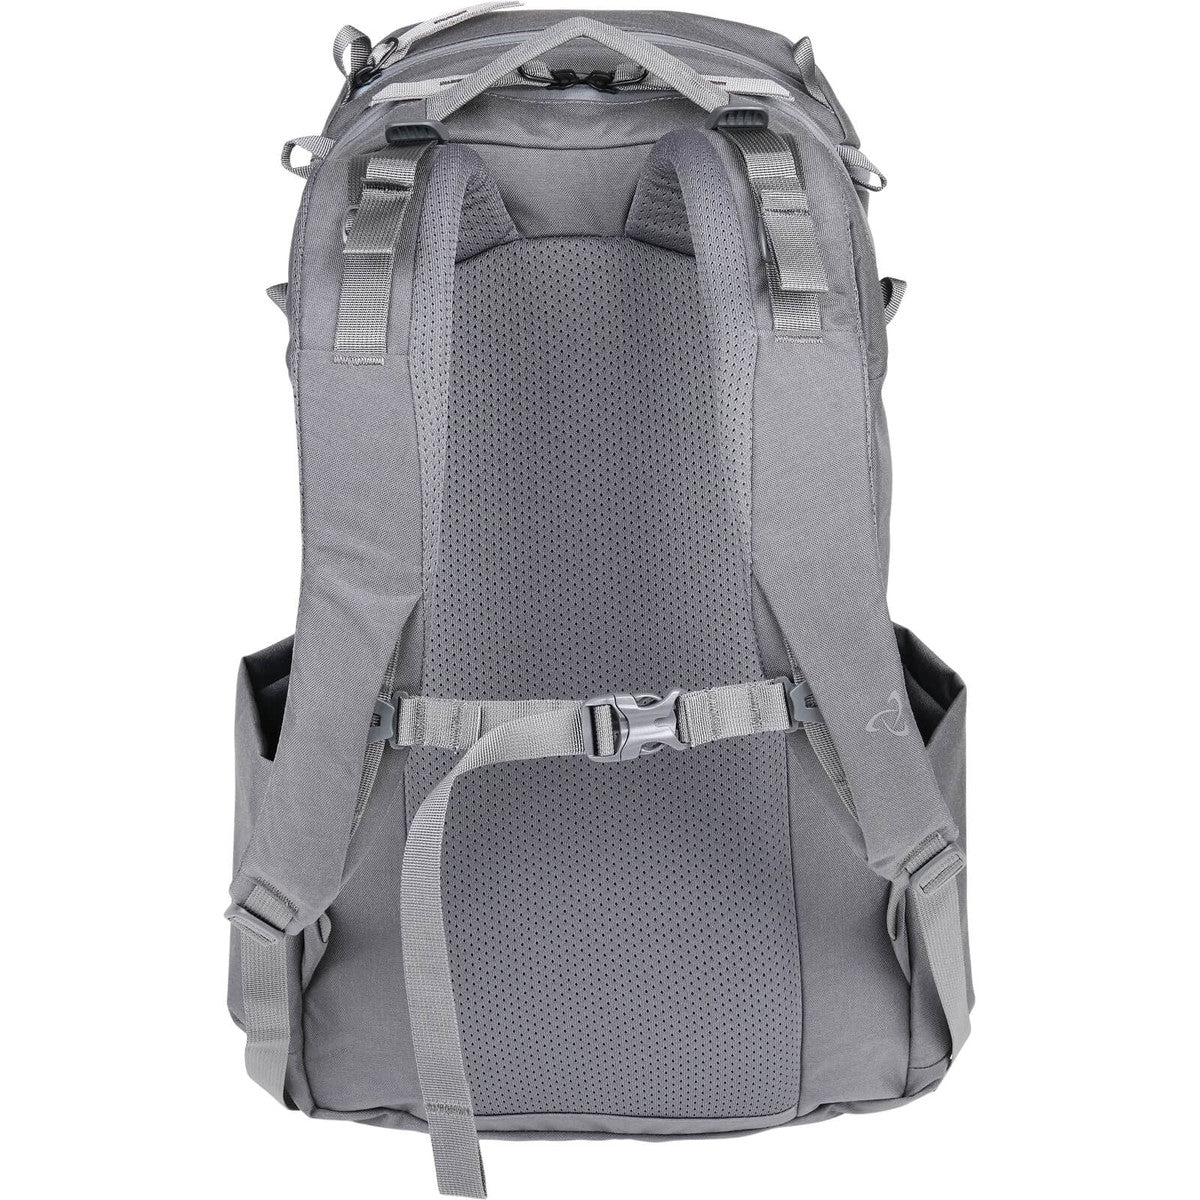 MYSTERY RANCH CATALYST BACKPACK - 26L